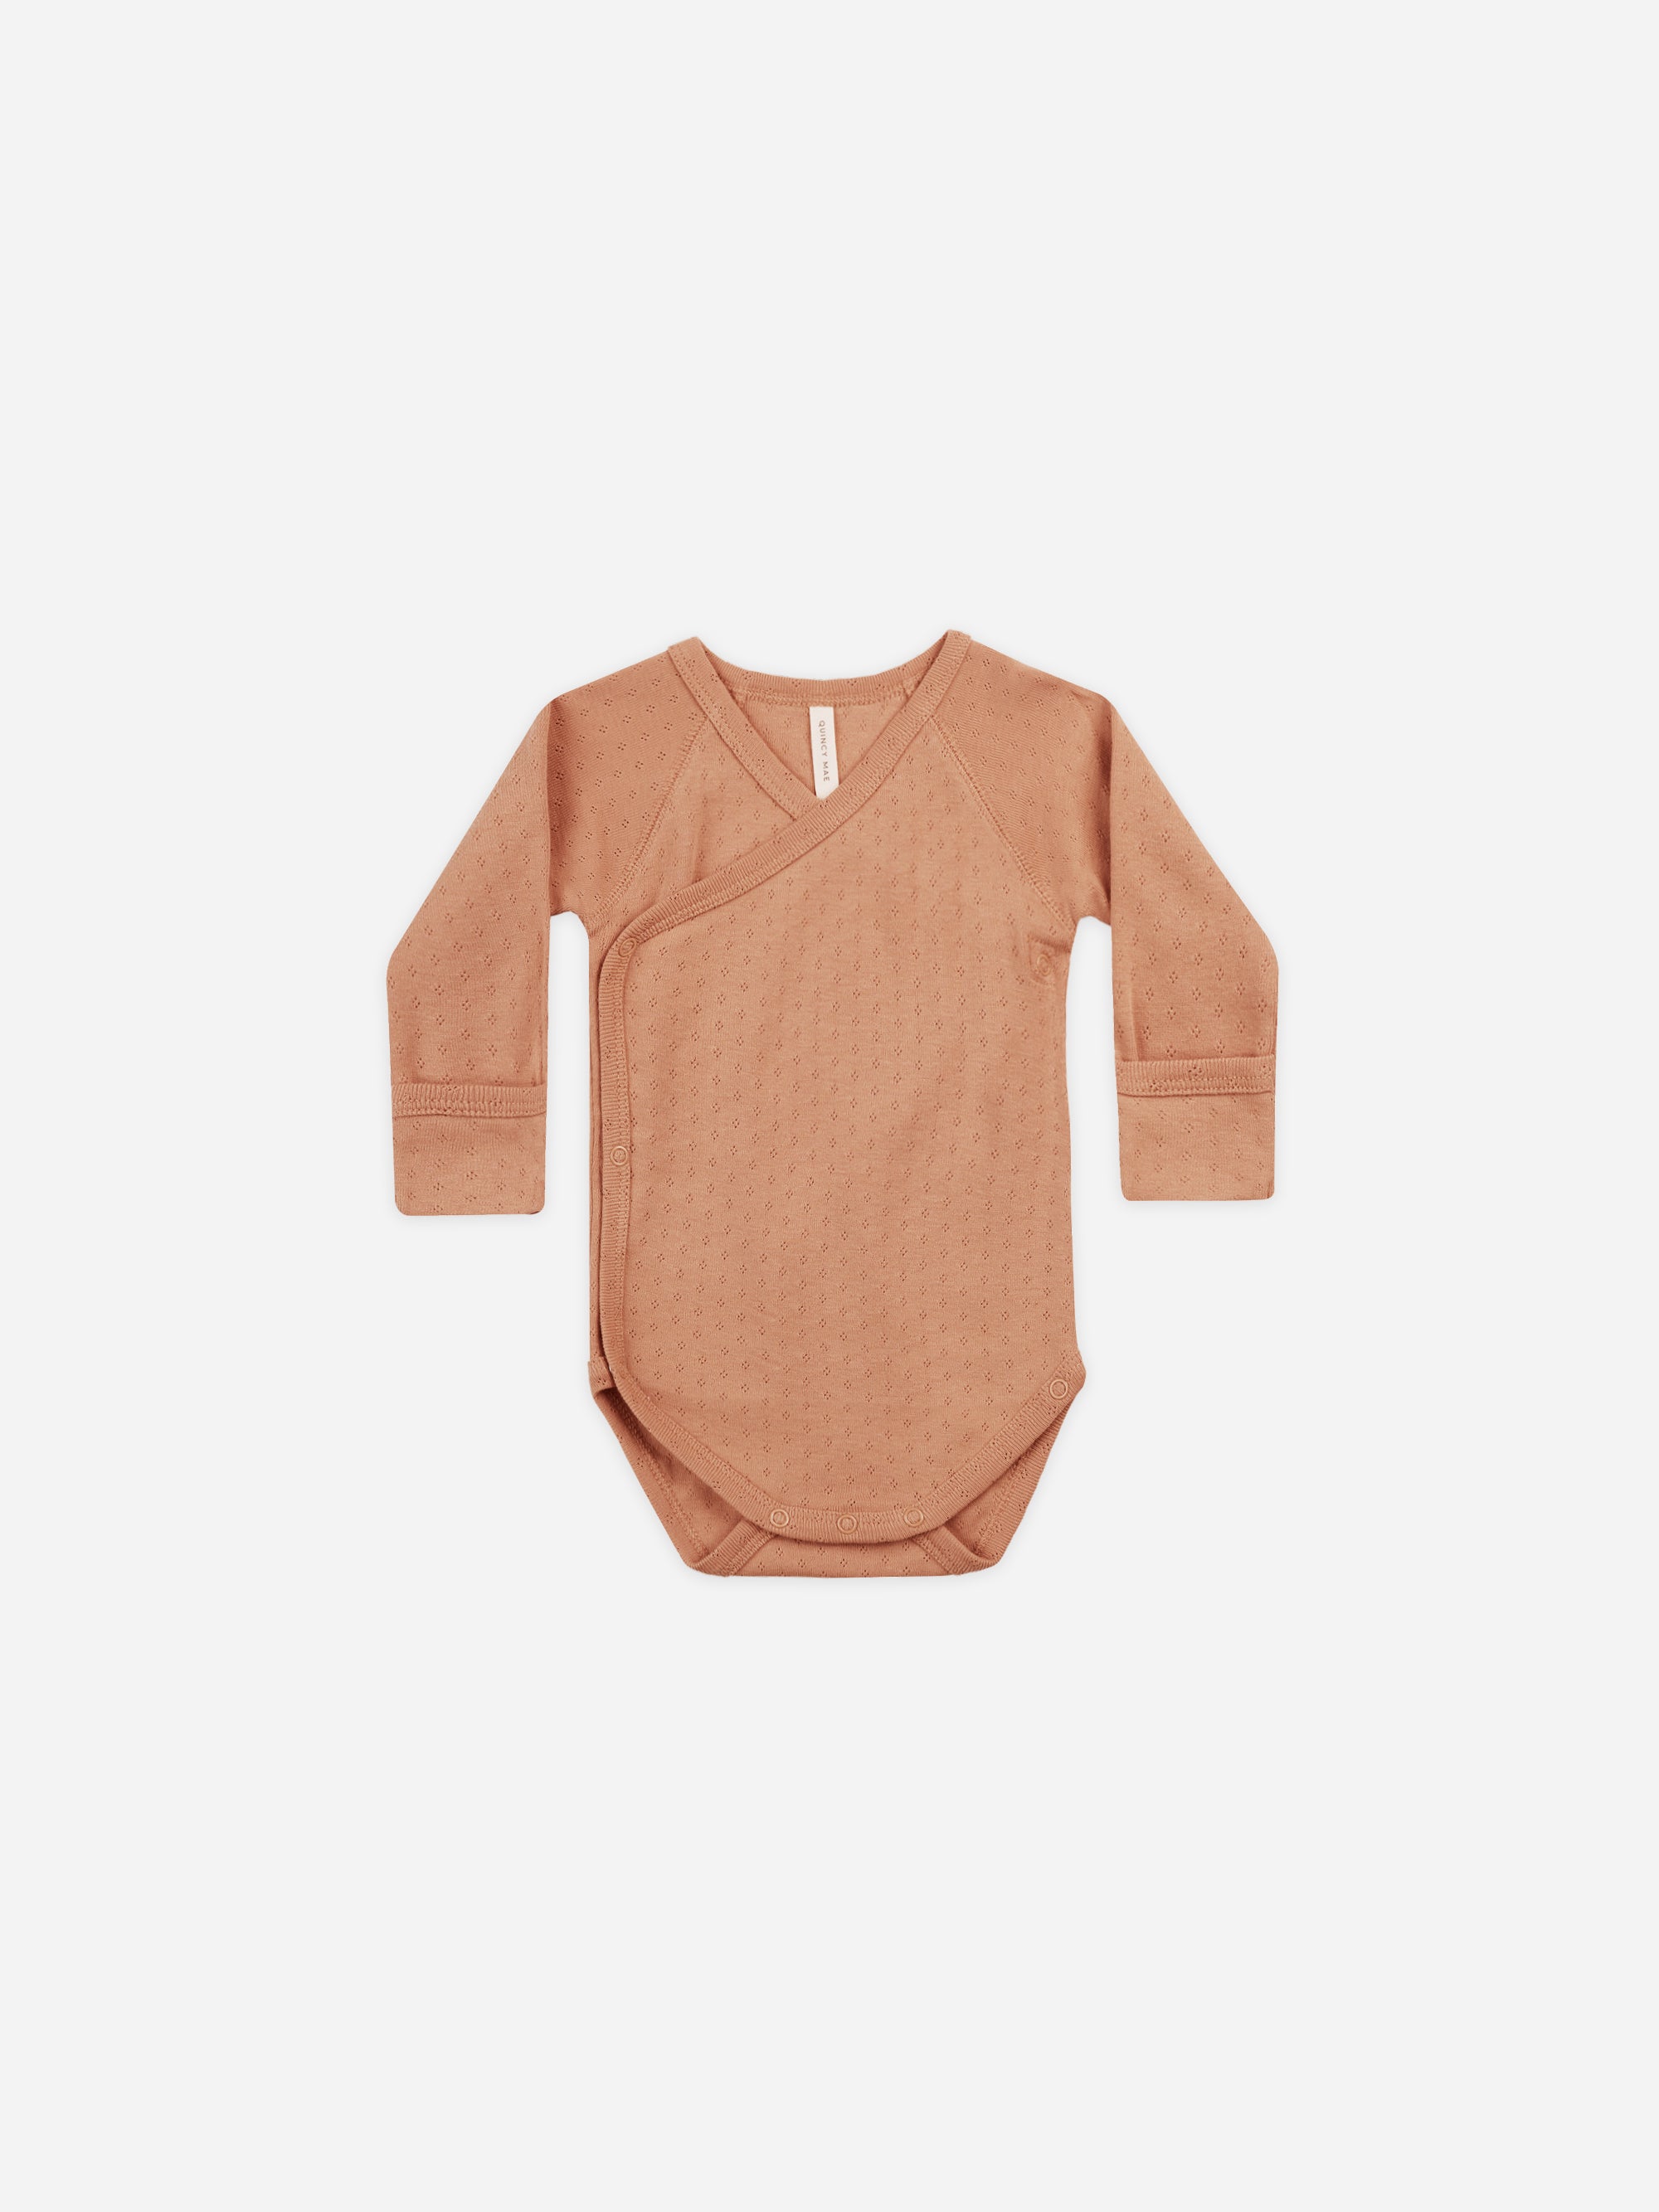 Pointelle Side Snap Bodysuit || Melon - Rylee + Cru | Kids Clothes | Trendy Baby Clothes | Modern Infant Outfits |